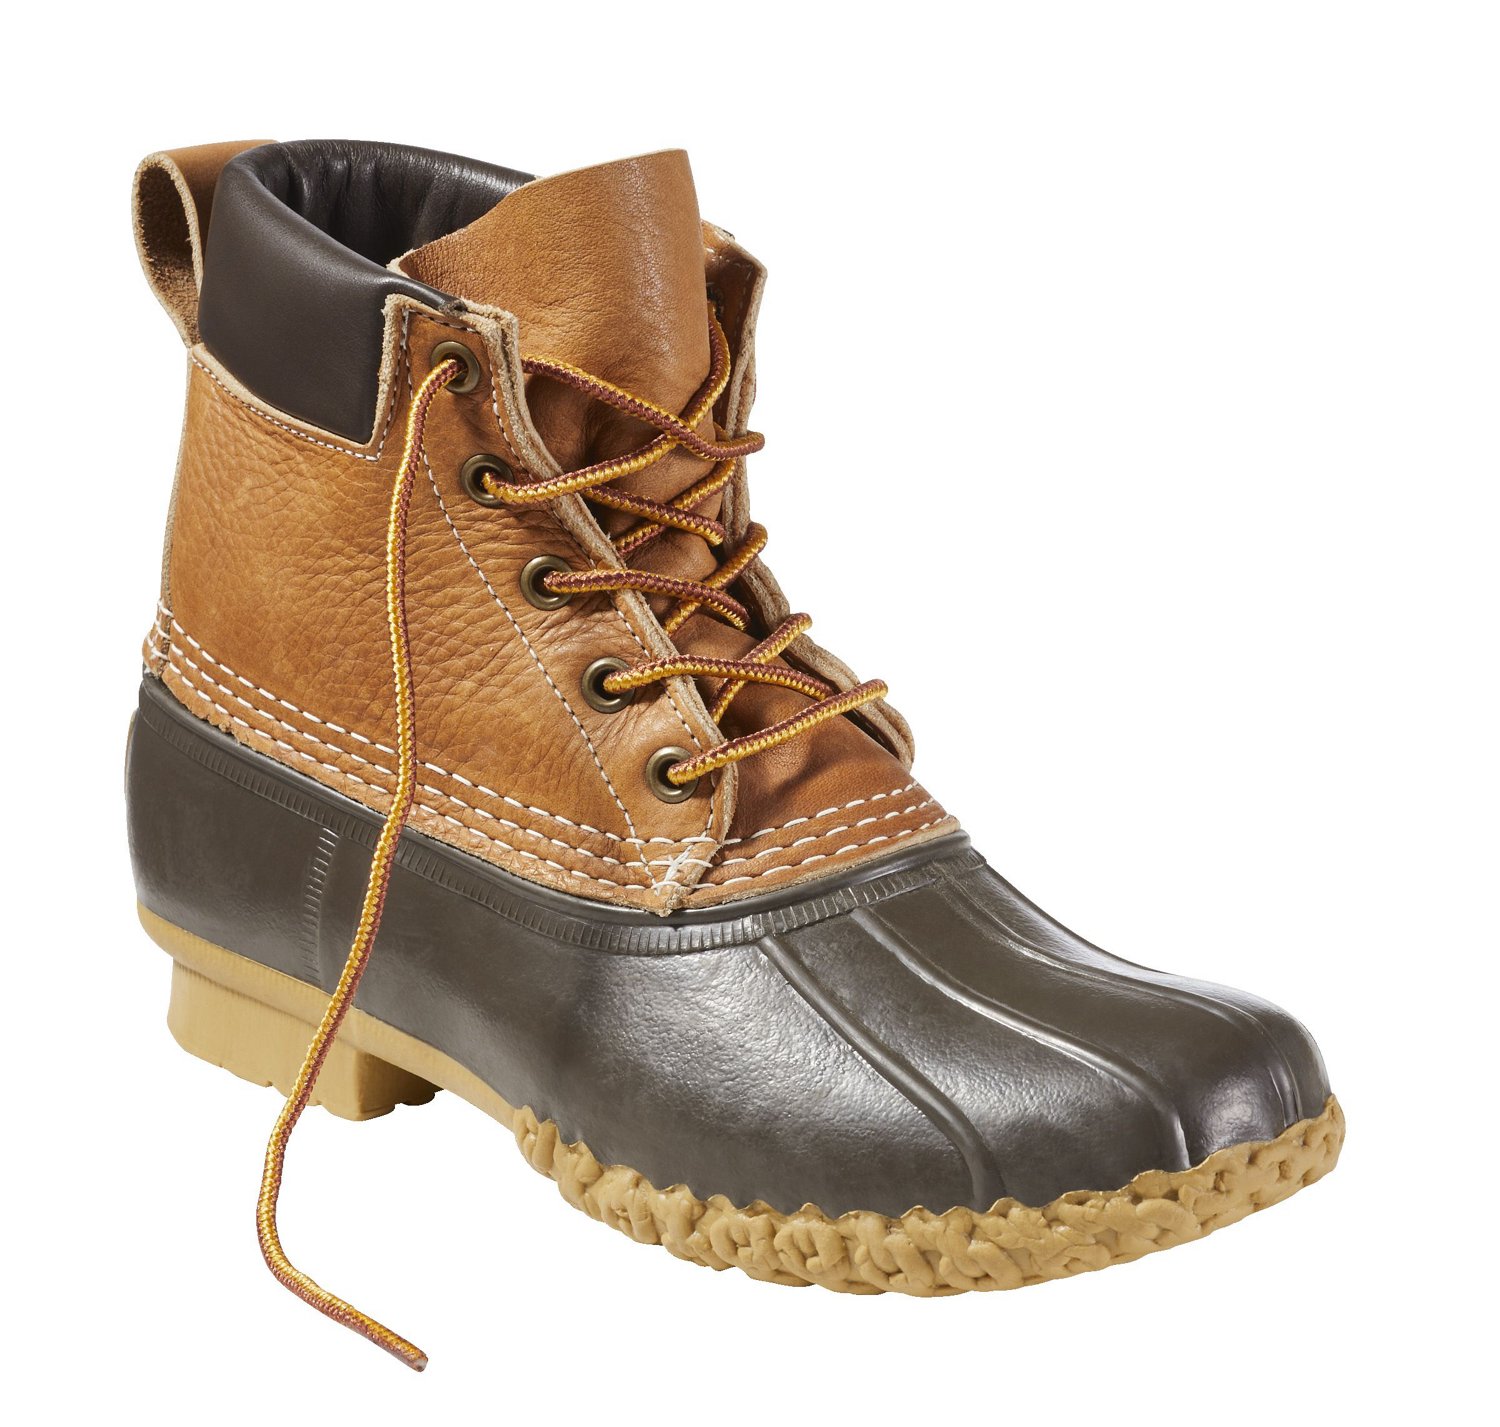 L.L. Bean Women's Tumbled-Leather Bean 6 in Boots | Academy